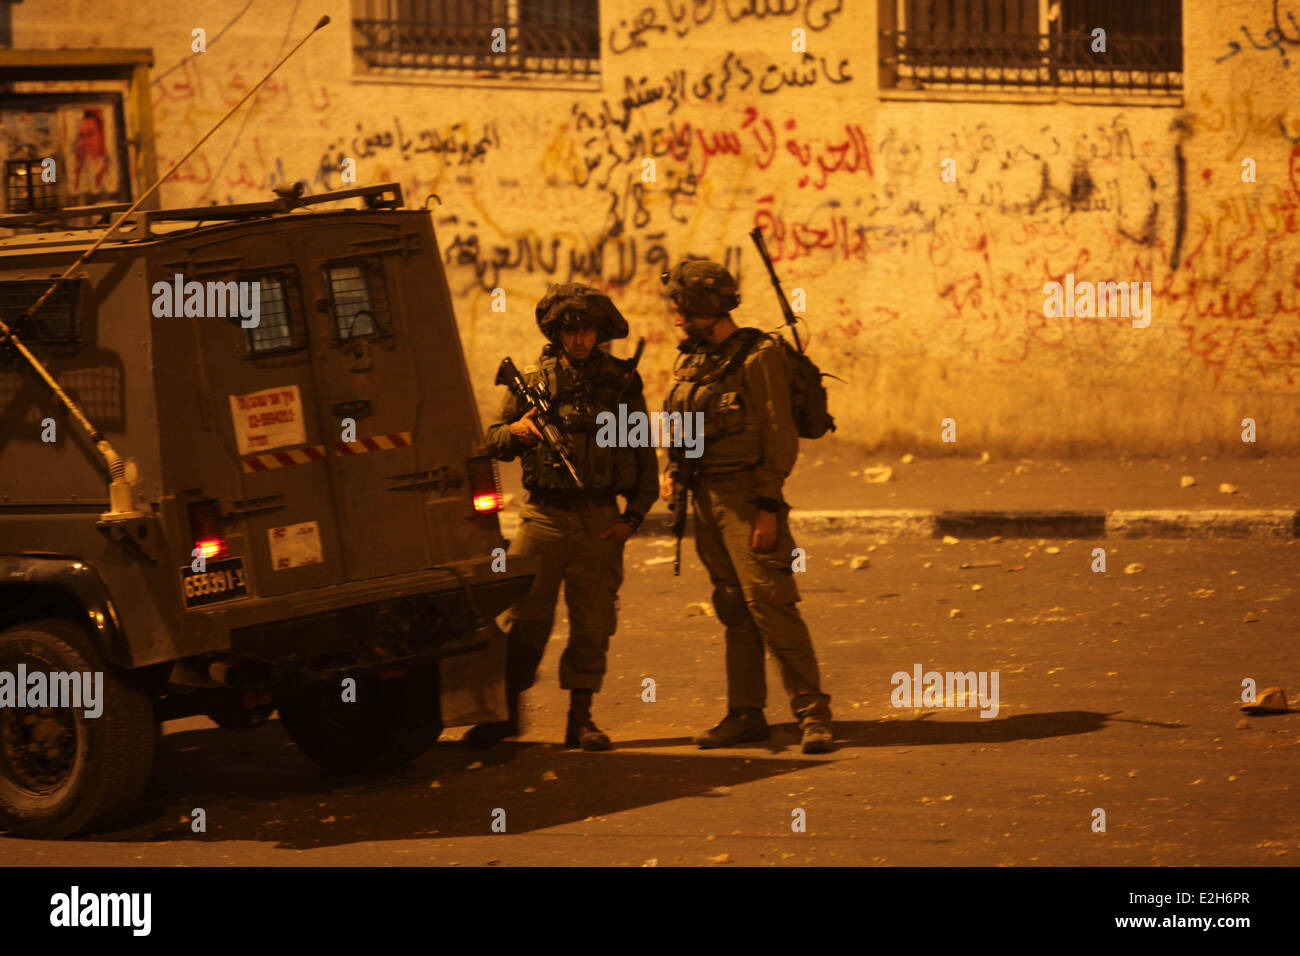 Bethlehem, West Bank. 20th June, 2014. Israeli soldiers patrol during a military operation to search for three missing Israeli youths in the Deheishe refugee camp in Bethlehem, on June 20, 2014. Israeli officials tried to reassure the public that authorities were doing everything in their power to retrieve the three missing Israeli teens presumed to be abducted a week ago in the West Bank. Credit:  Luay Sababa/Xinhua/Alamy Live News Stock Photo